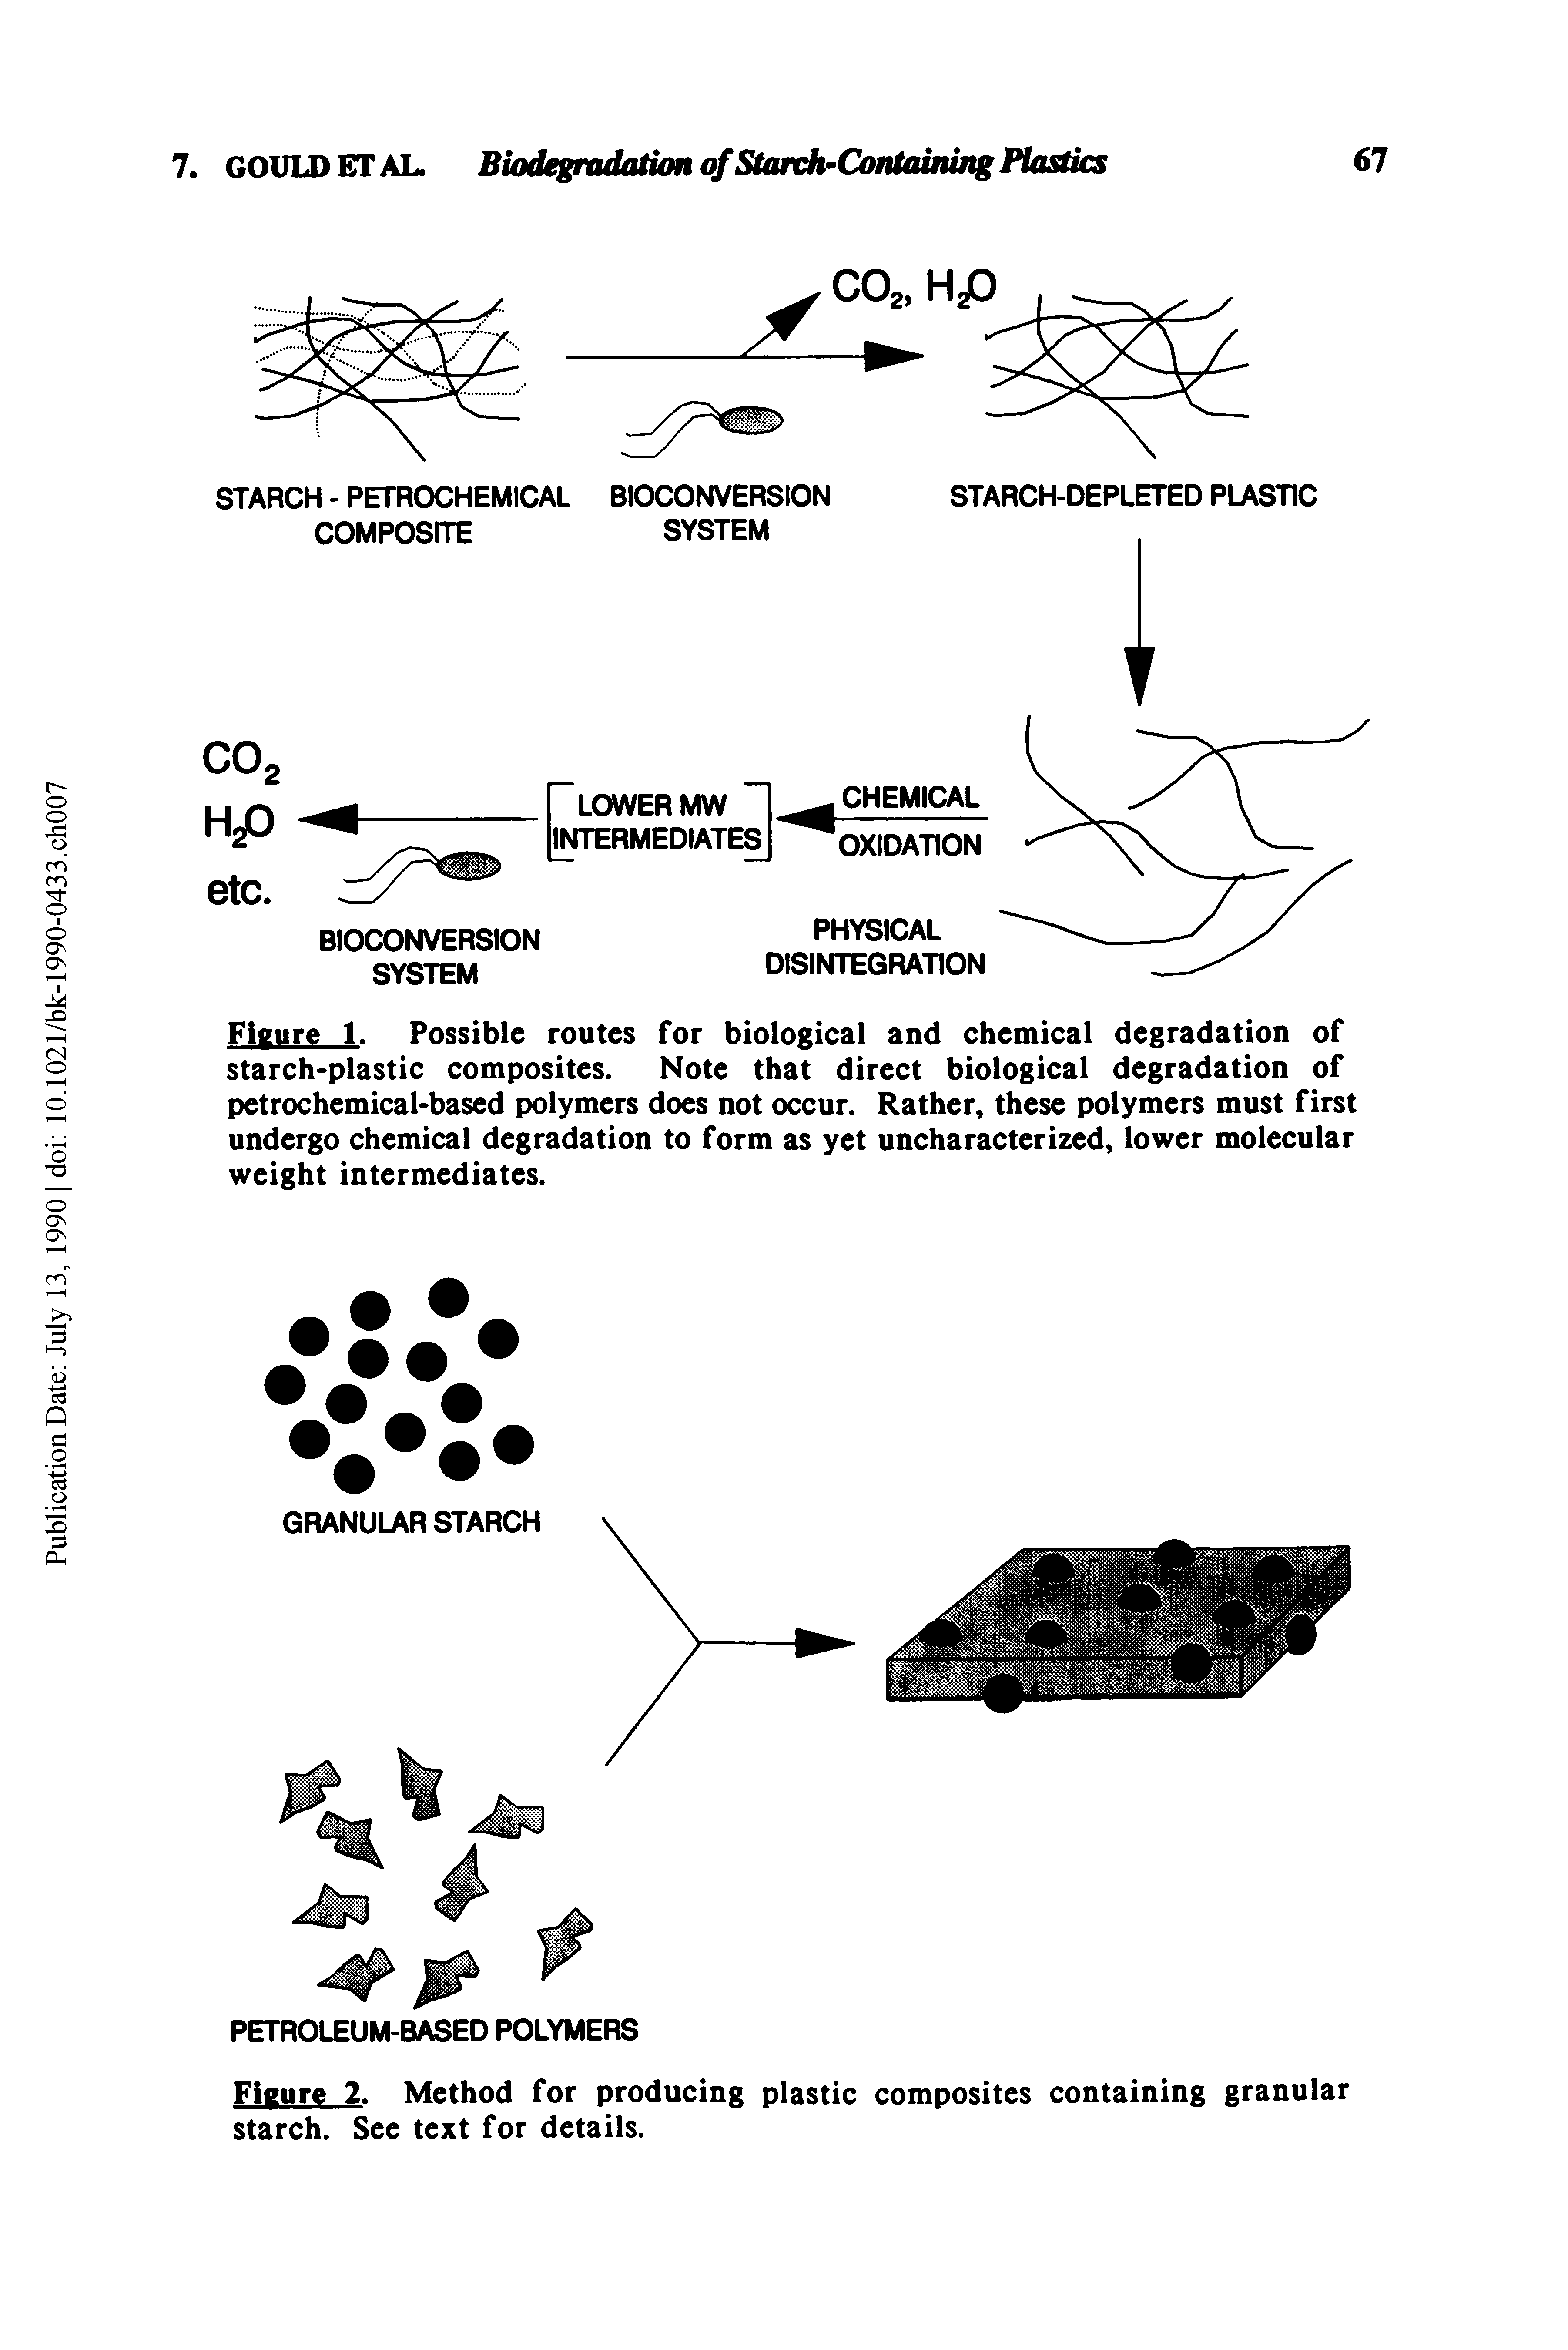 Figure 1. Possible routes for biological and chemical degradation of starch-plastic composites. Note that direct biological degradation of petrochemical-based polymers does not occur. Rather, these polymers must first undergo chemical degradation to form as yet uncharacterized, lower molecular weight intermediates.